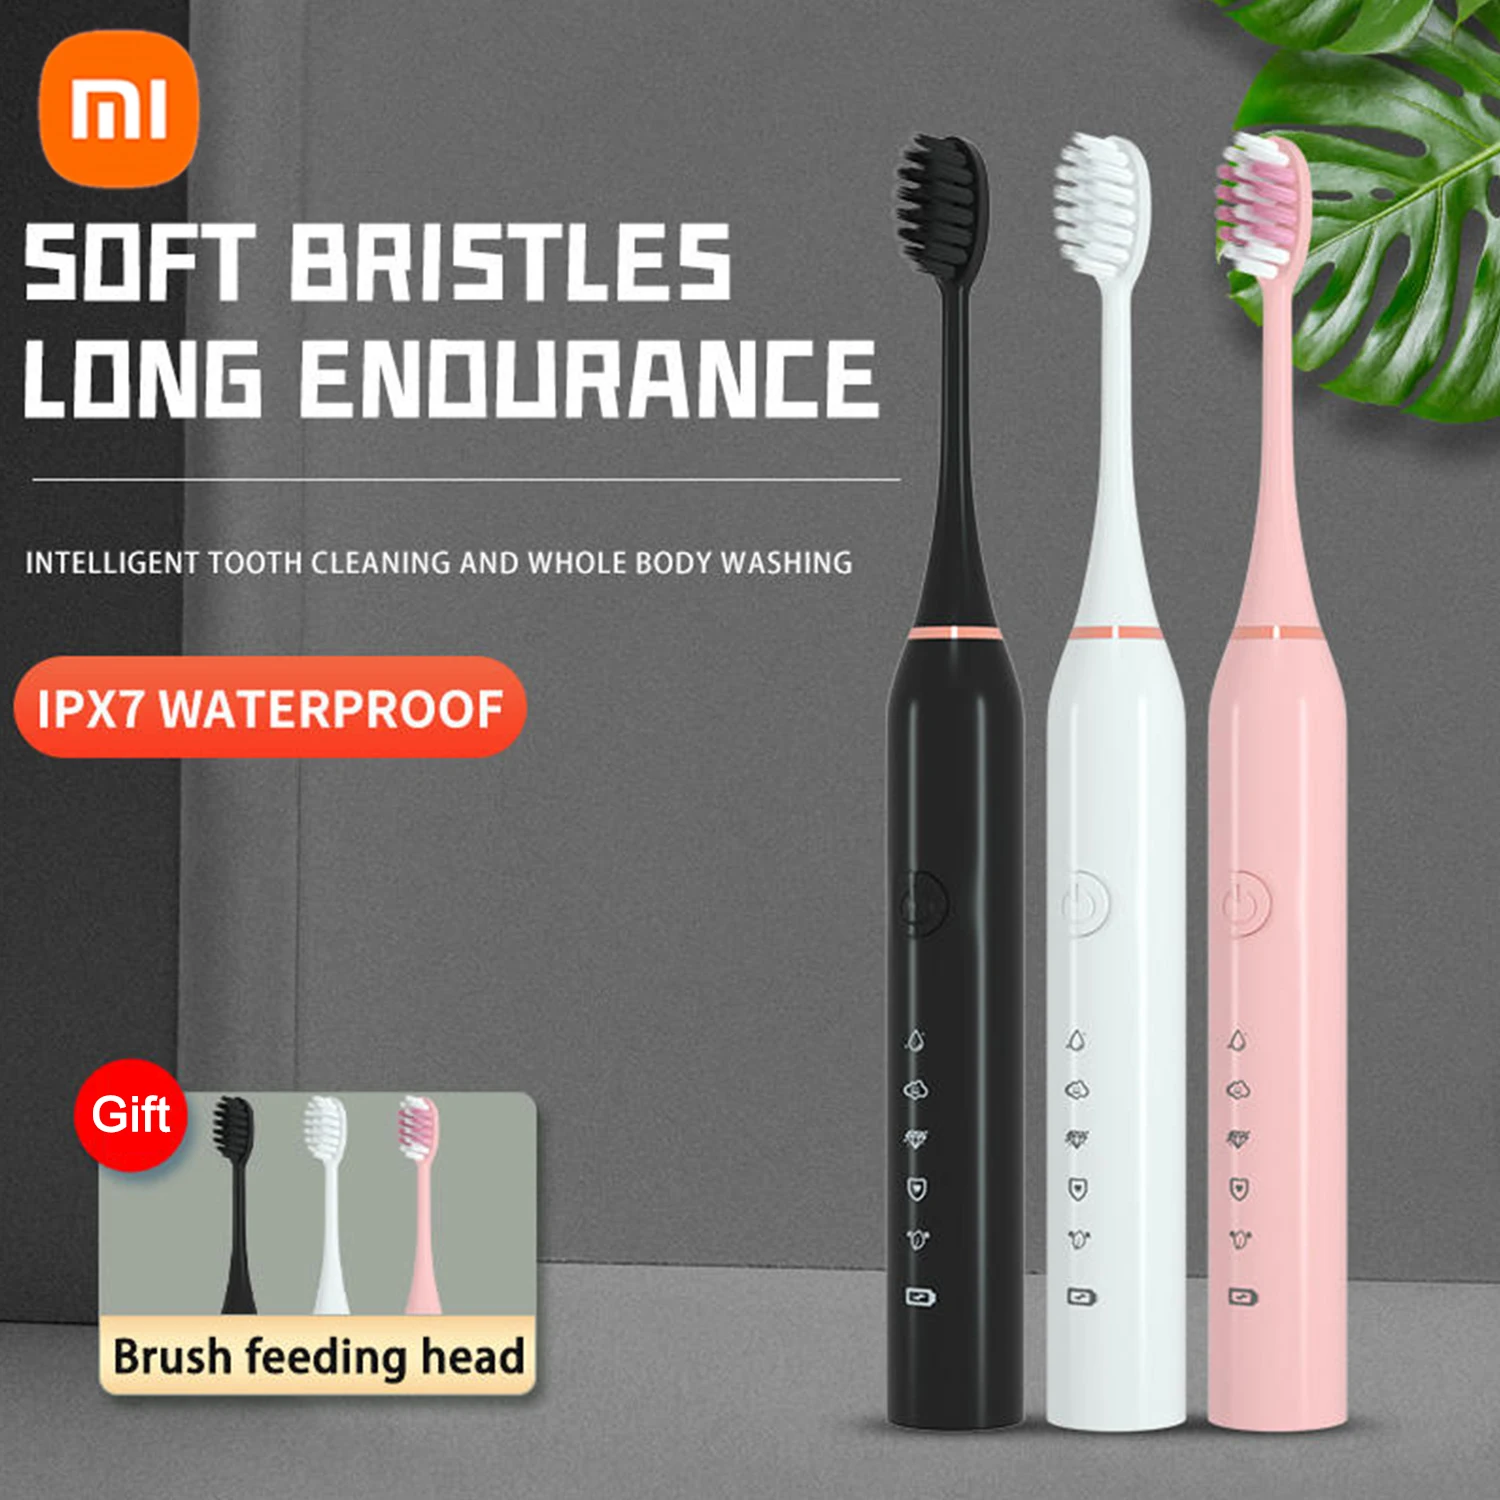 

Electric Toothbrush Battery Sonic Vibrating Toothbrushes Waterproof Soft Bristle Toothbrush With 3 Replacement Toothbrush Heads